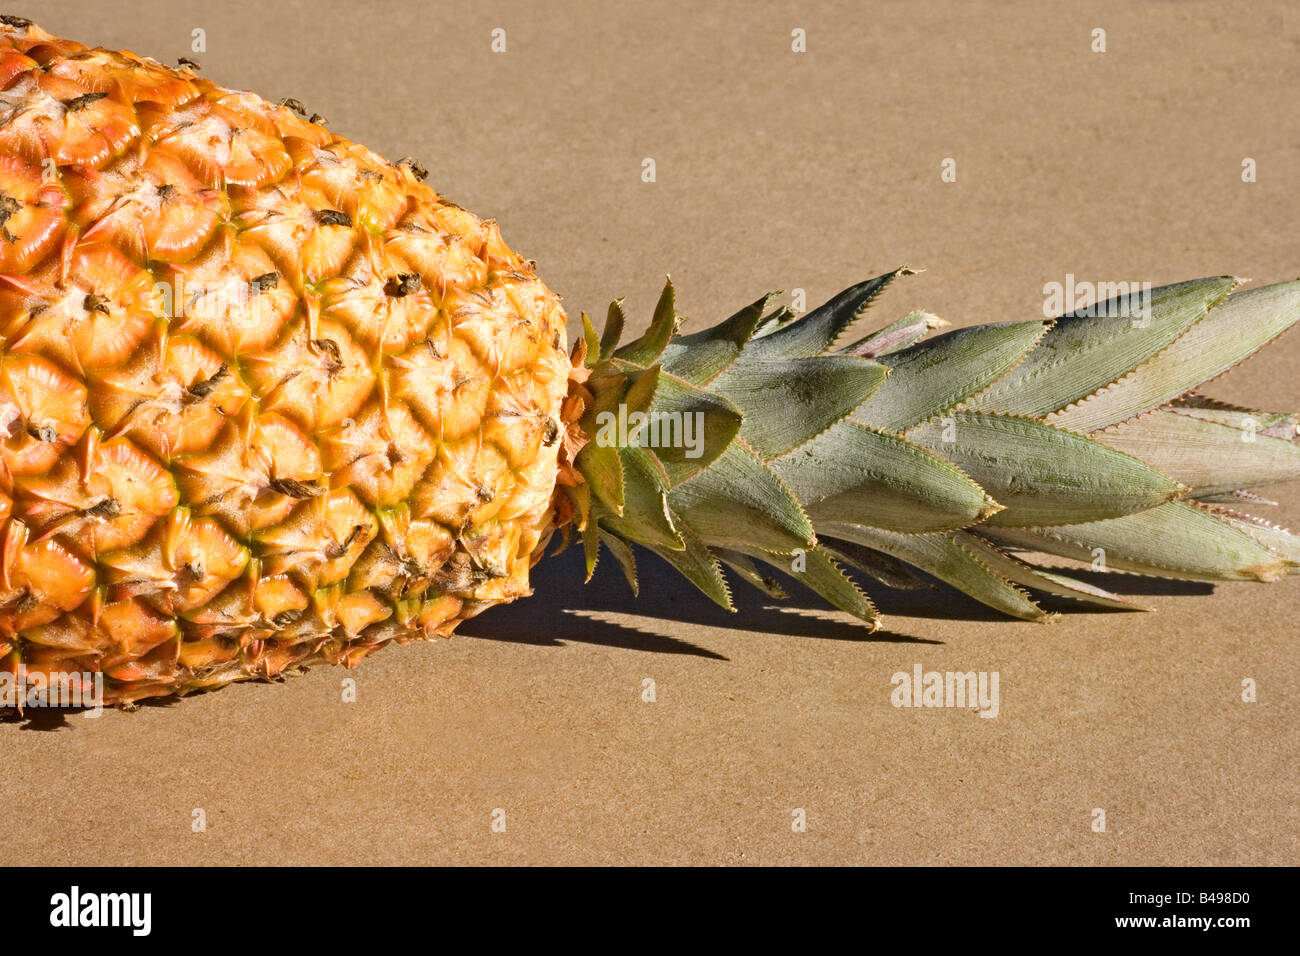 Ripe pineapple detail isolated on beige background Stock Photo